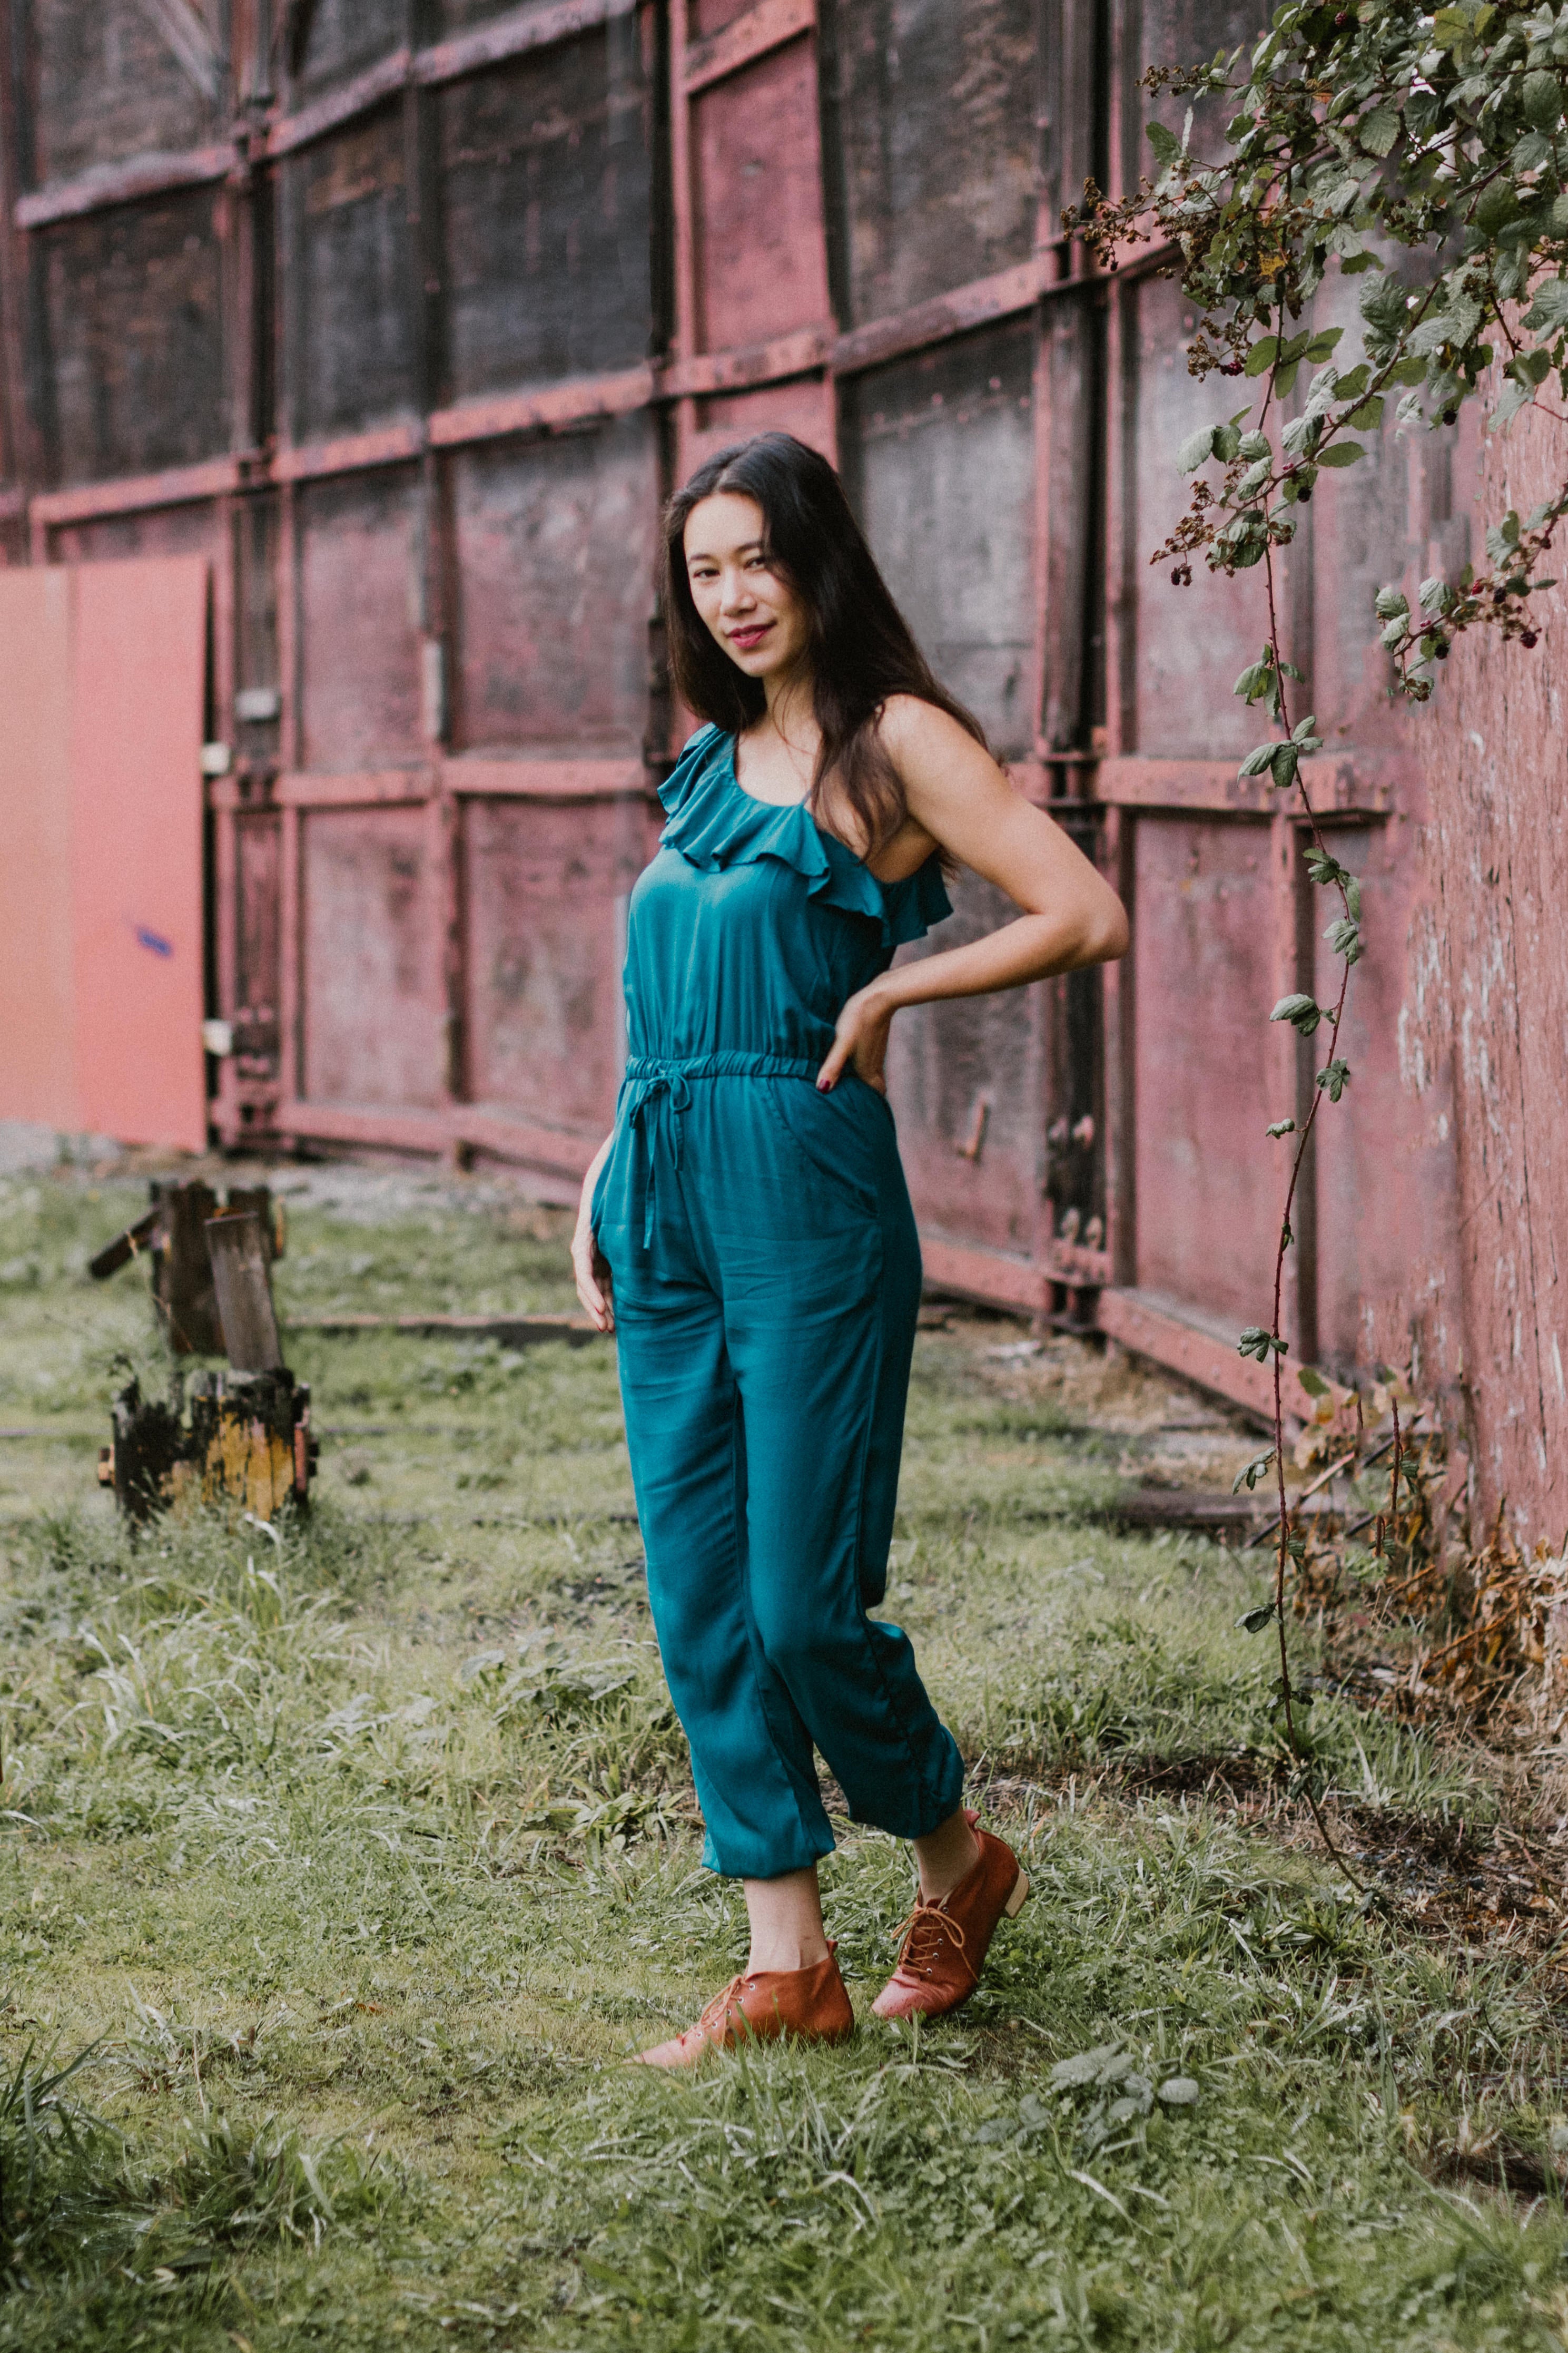 Beautiful Young Woman Is Posing In Jumpsuit And High Heels Stock Photo -  Download Image Now - iStock